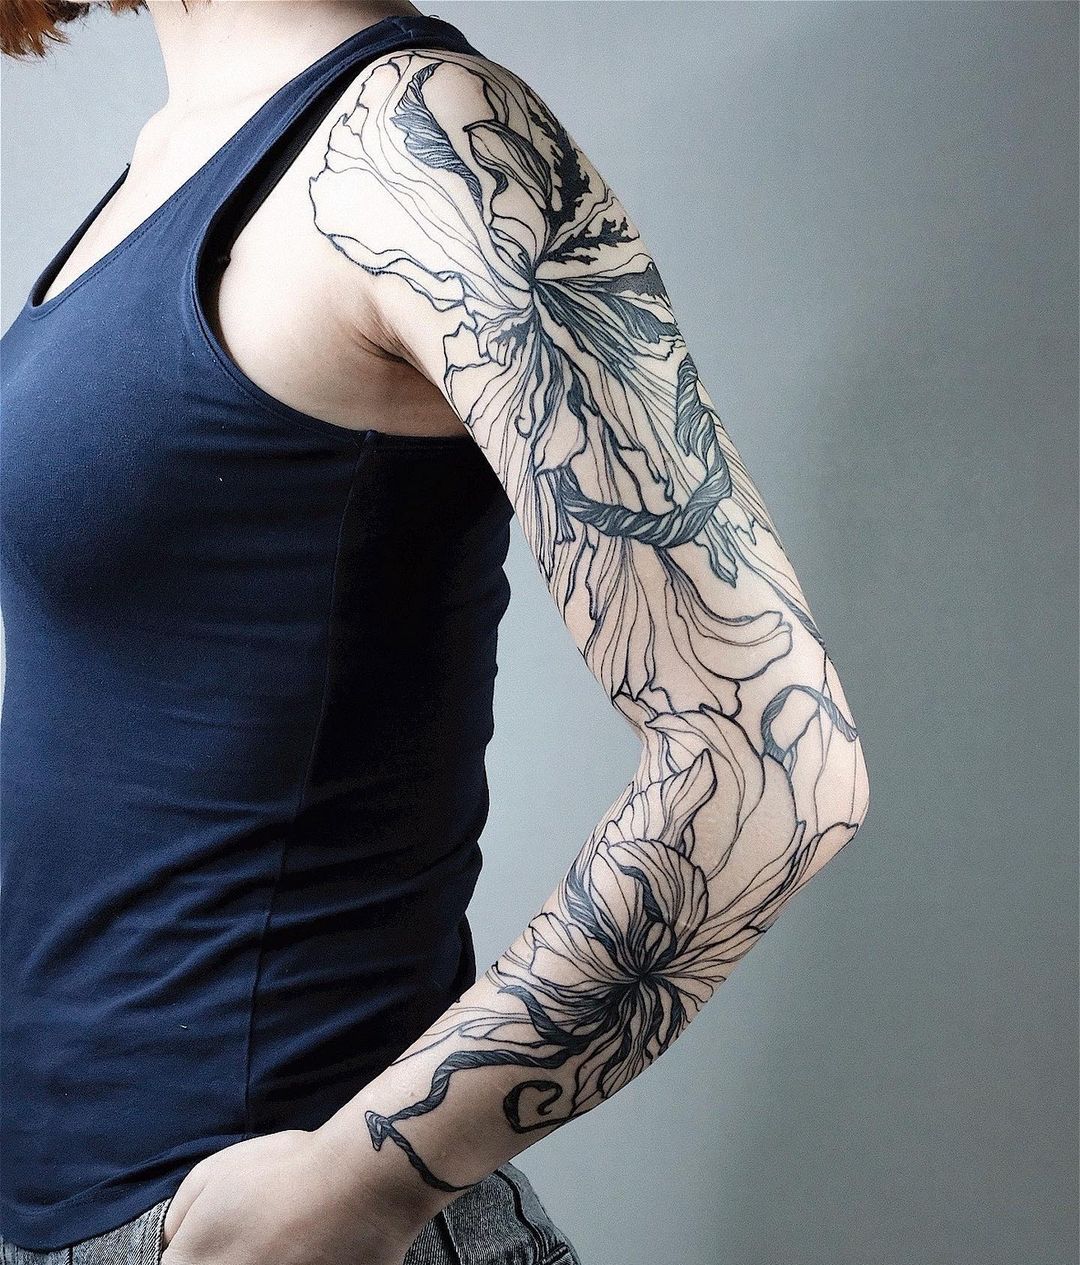 15,844 Tattooing Process Images, Stock Photos & Vectors | Shutterstock